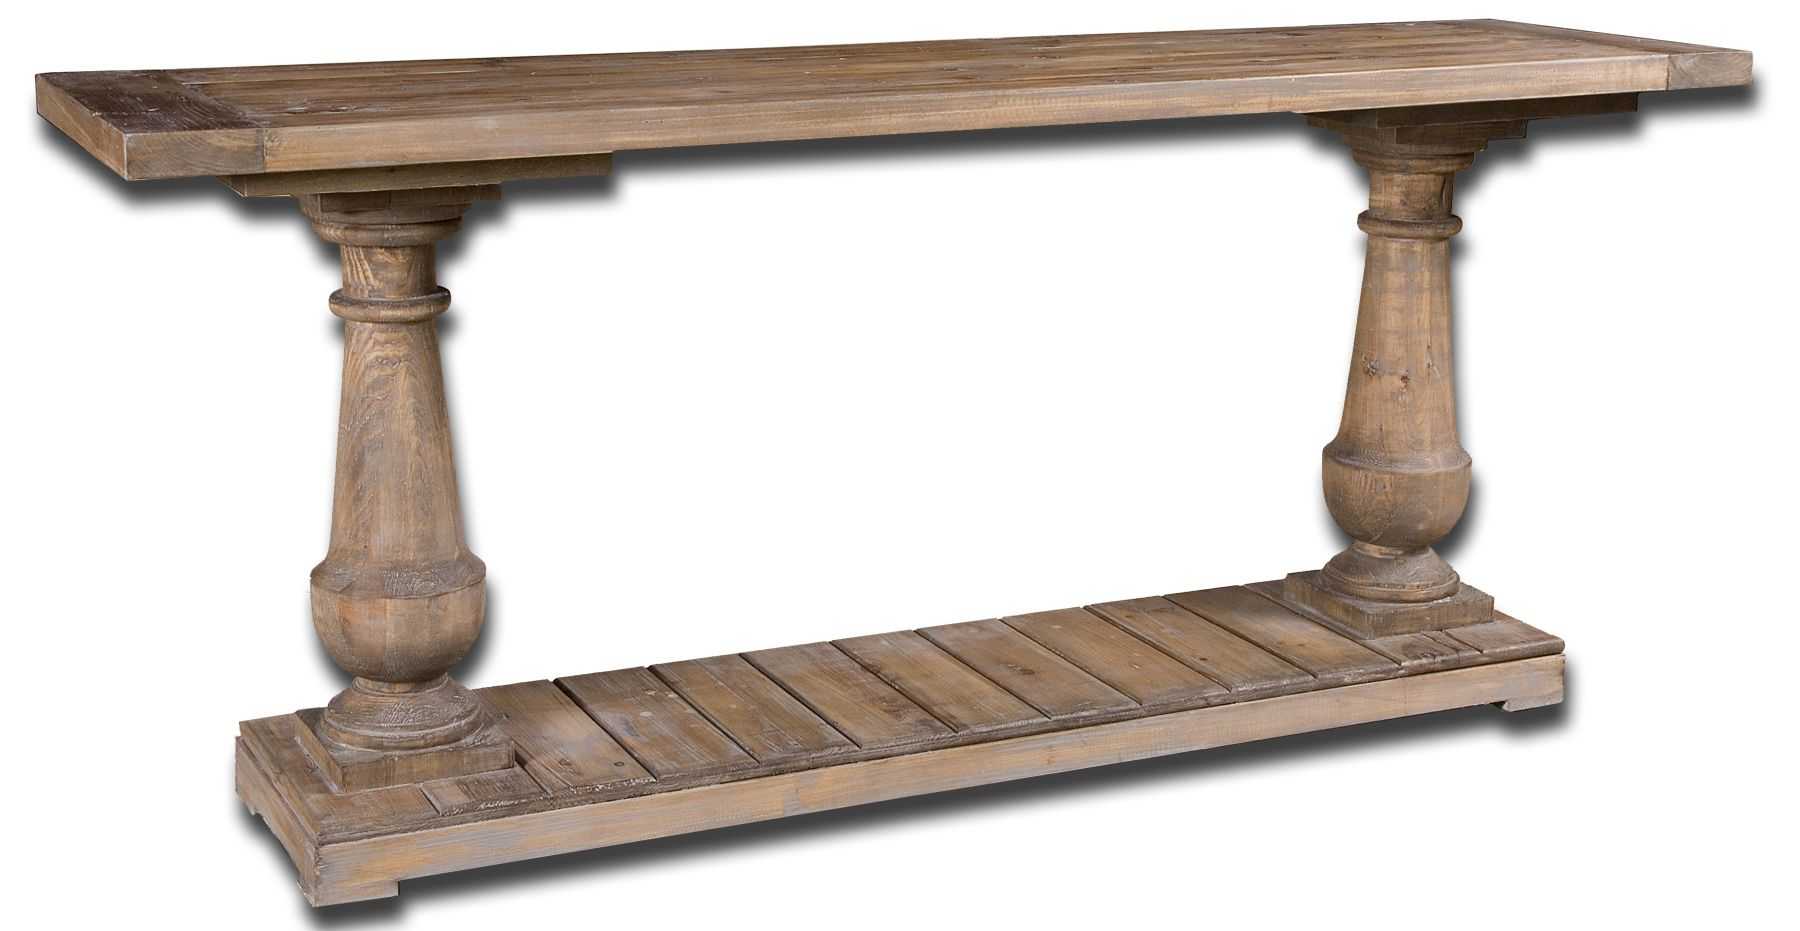 Uttermost Home Motor Freight - Rate to be Quoted Uttermost Stratford Console - Shipping December